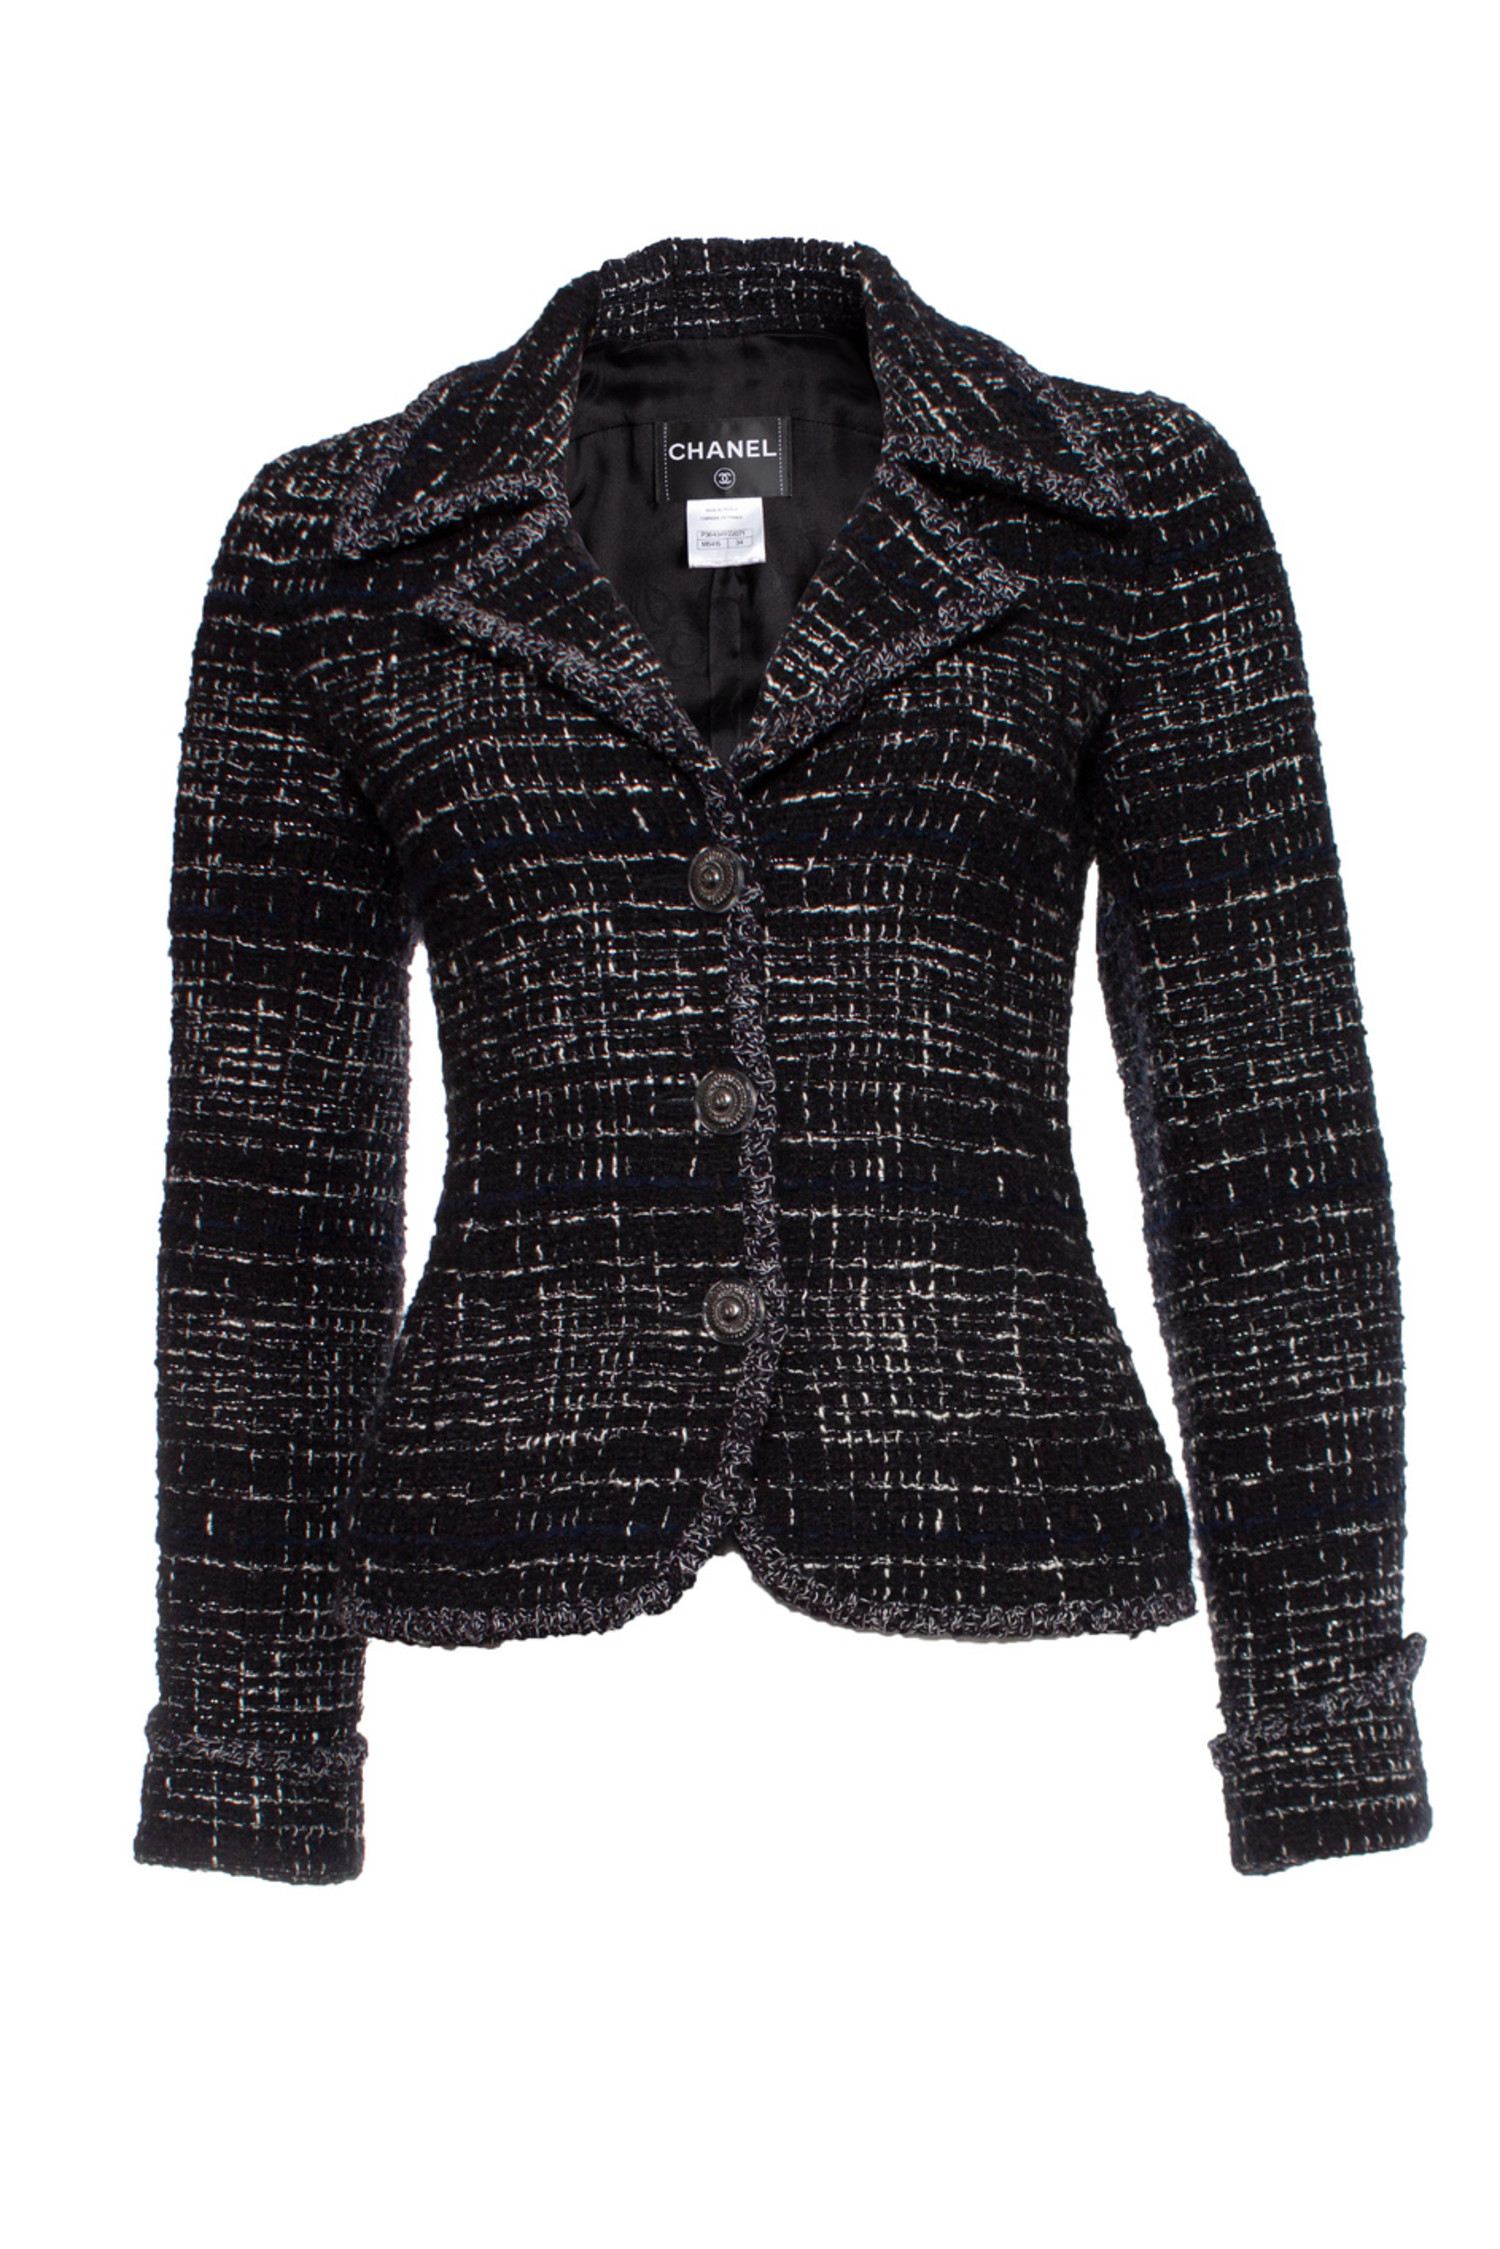 Chanel, black and white boucle jacket with lurex - Unique Designer